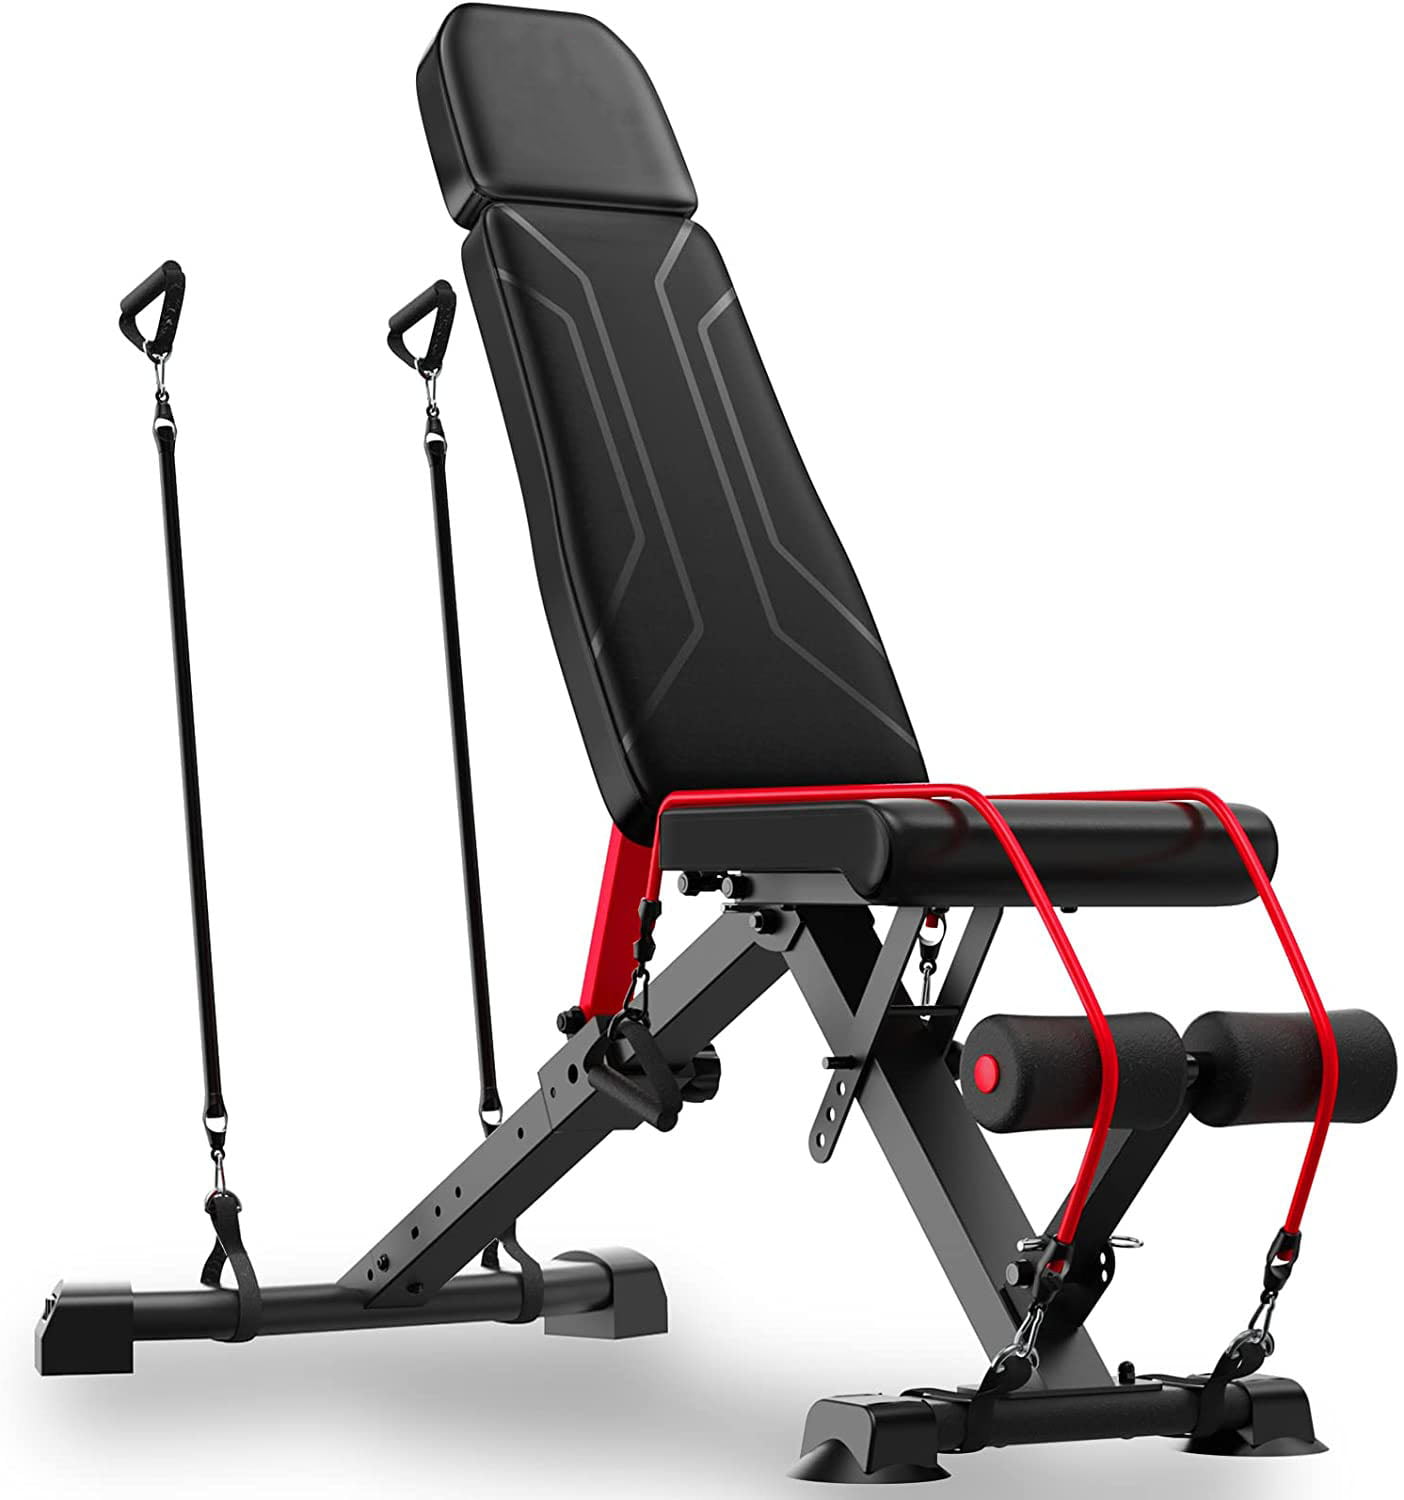 Details about   FlyBird Adjustable Weight Bench Incline Decline Foldable Workout Full Body *Gym*